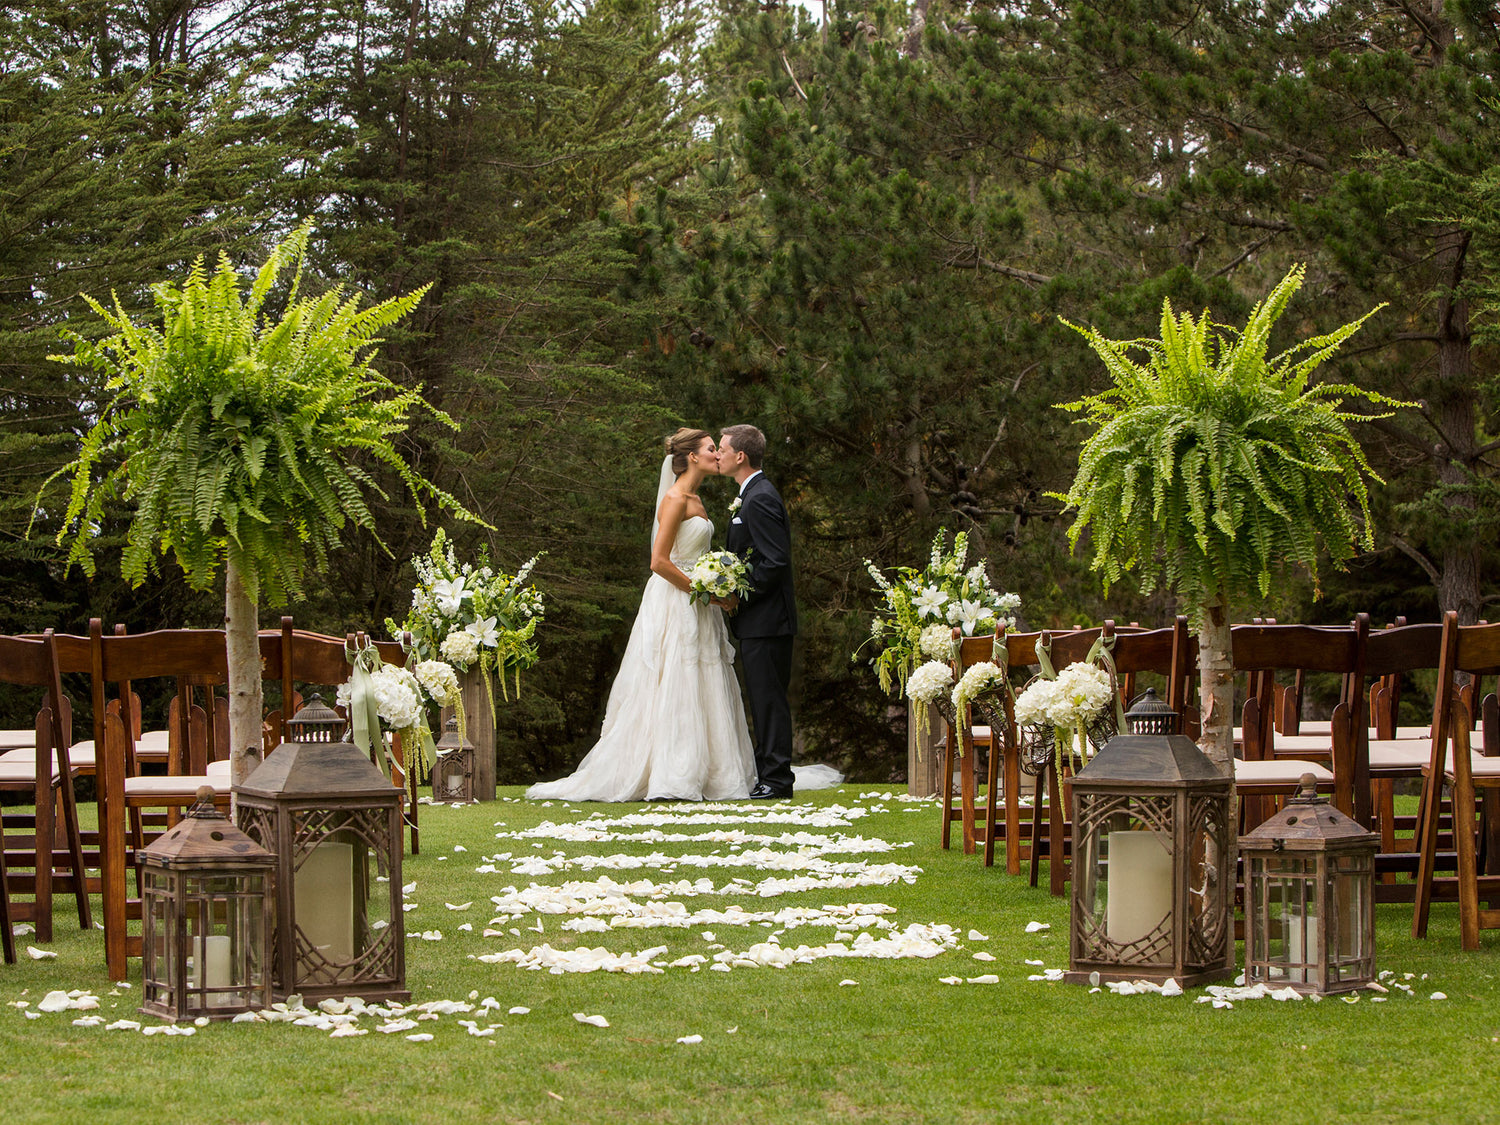 Outdoor wedding at Poppy Hills Golf Course in Pebble Beach with bride in white and groom in black tuxedo at the alter in front of a grove of pines